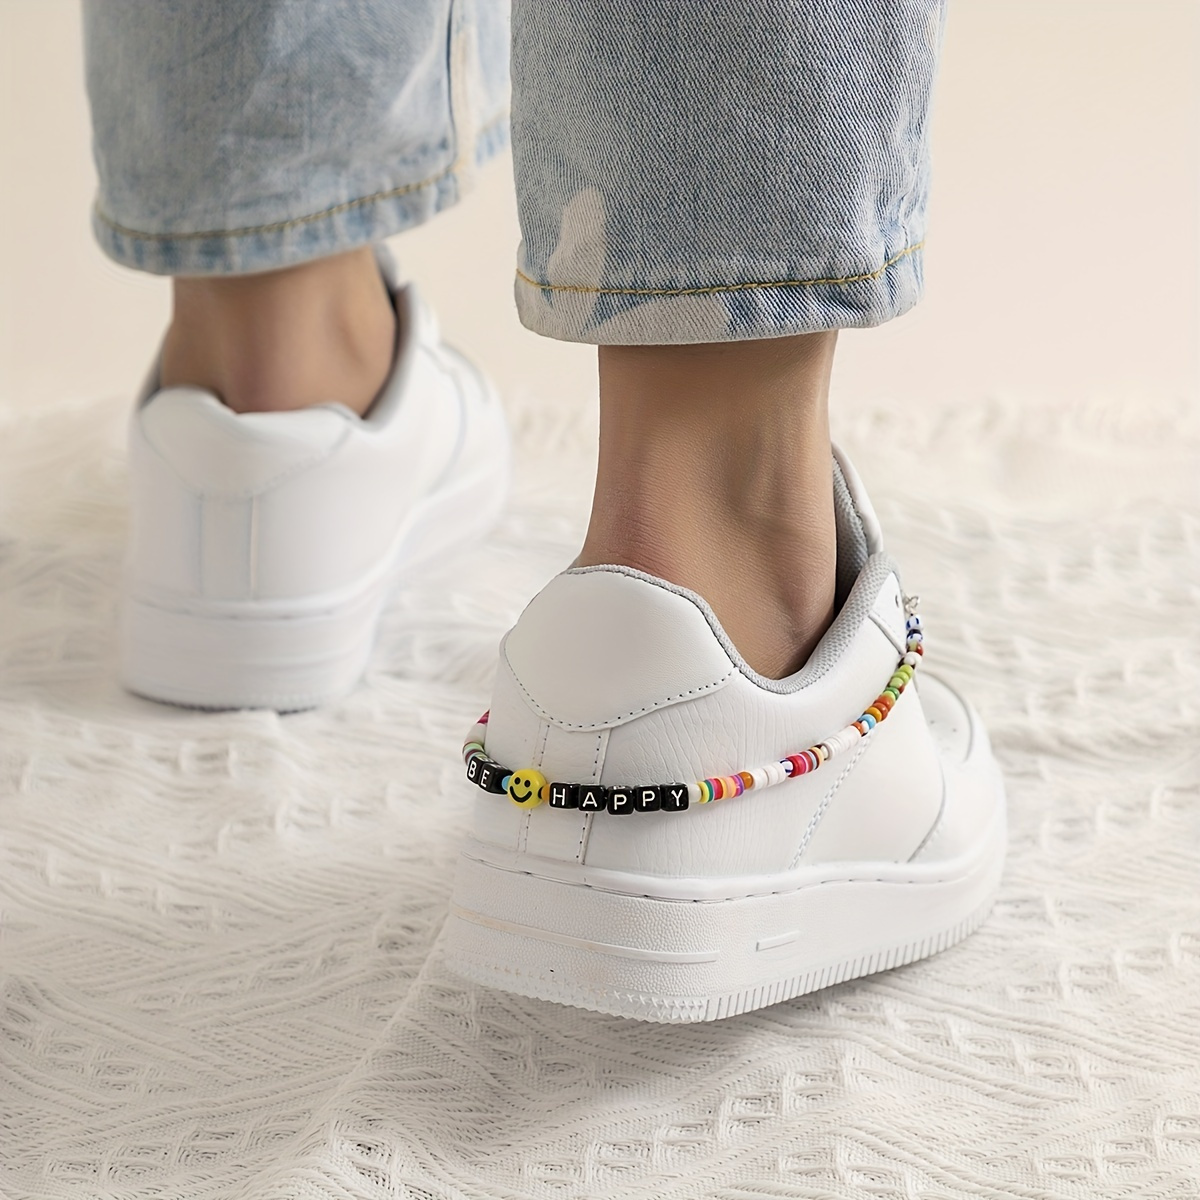 Simple Colorful Beaded Shoe Chain Personality Soft Pottery Beaded Chain, Don't Miss These Great Deals